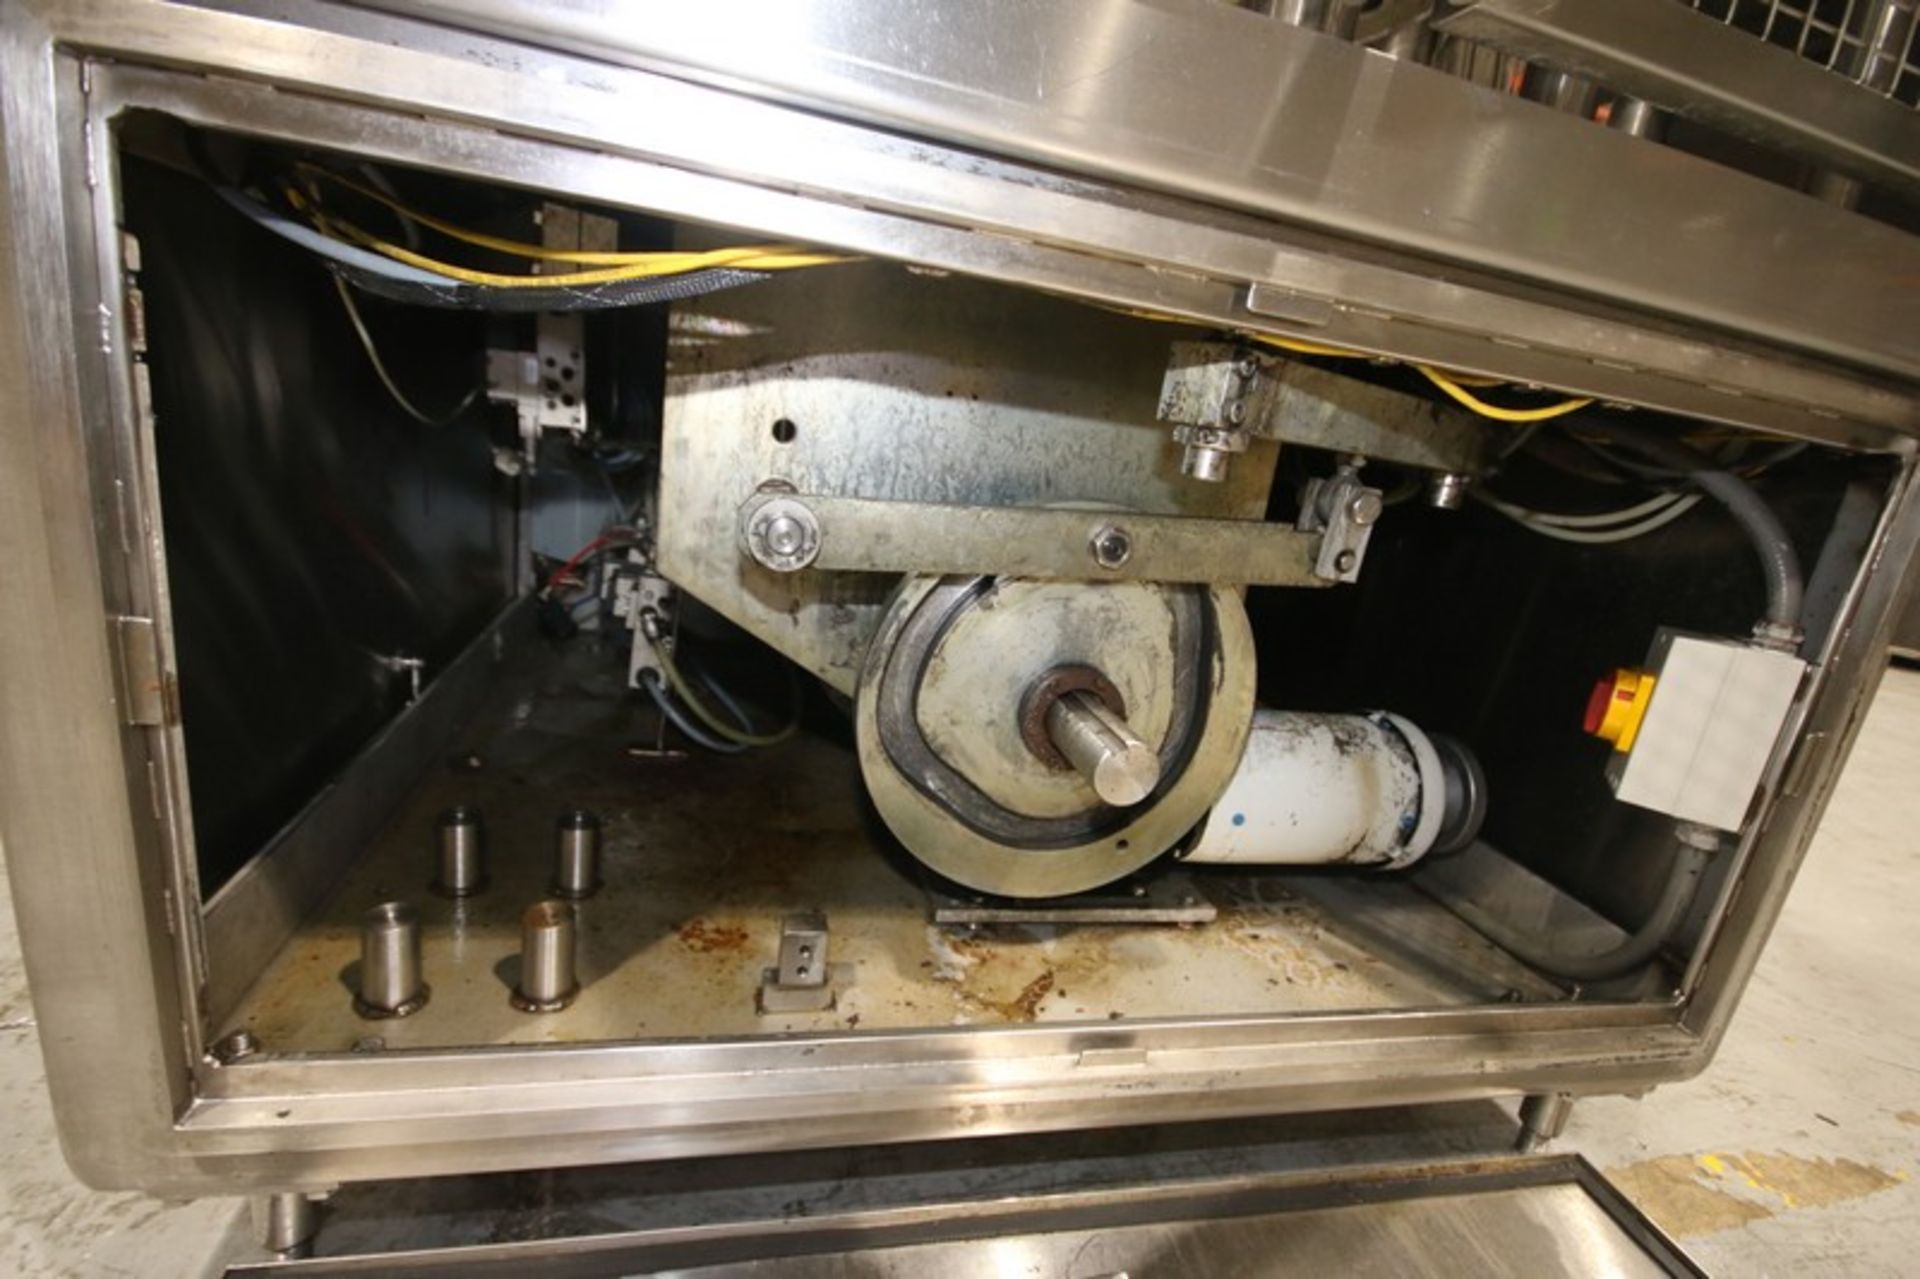 Osgood S/S Rotary Cup Filler, Model 2001-R, SN 232-790, with Filler Bowl, Cup Denester, 2-Head - Image 14 of 16